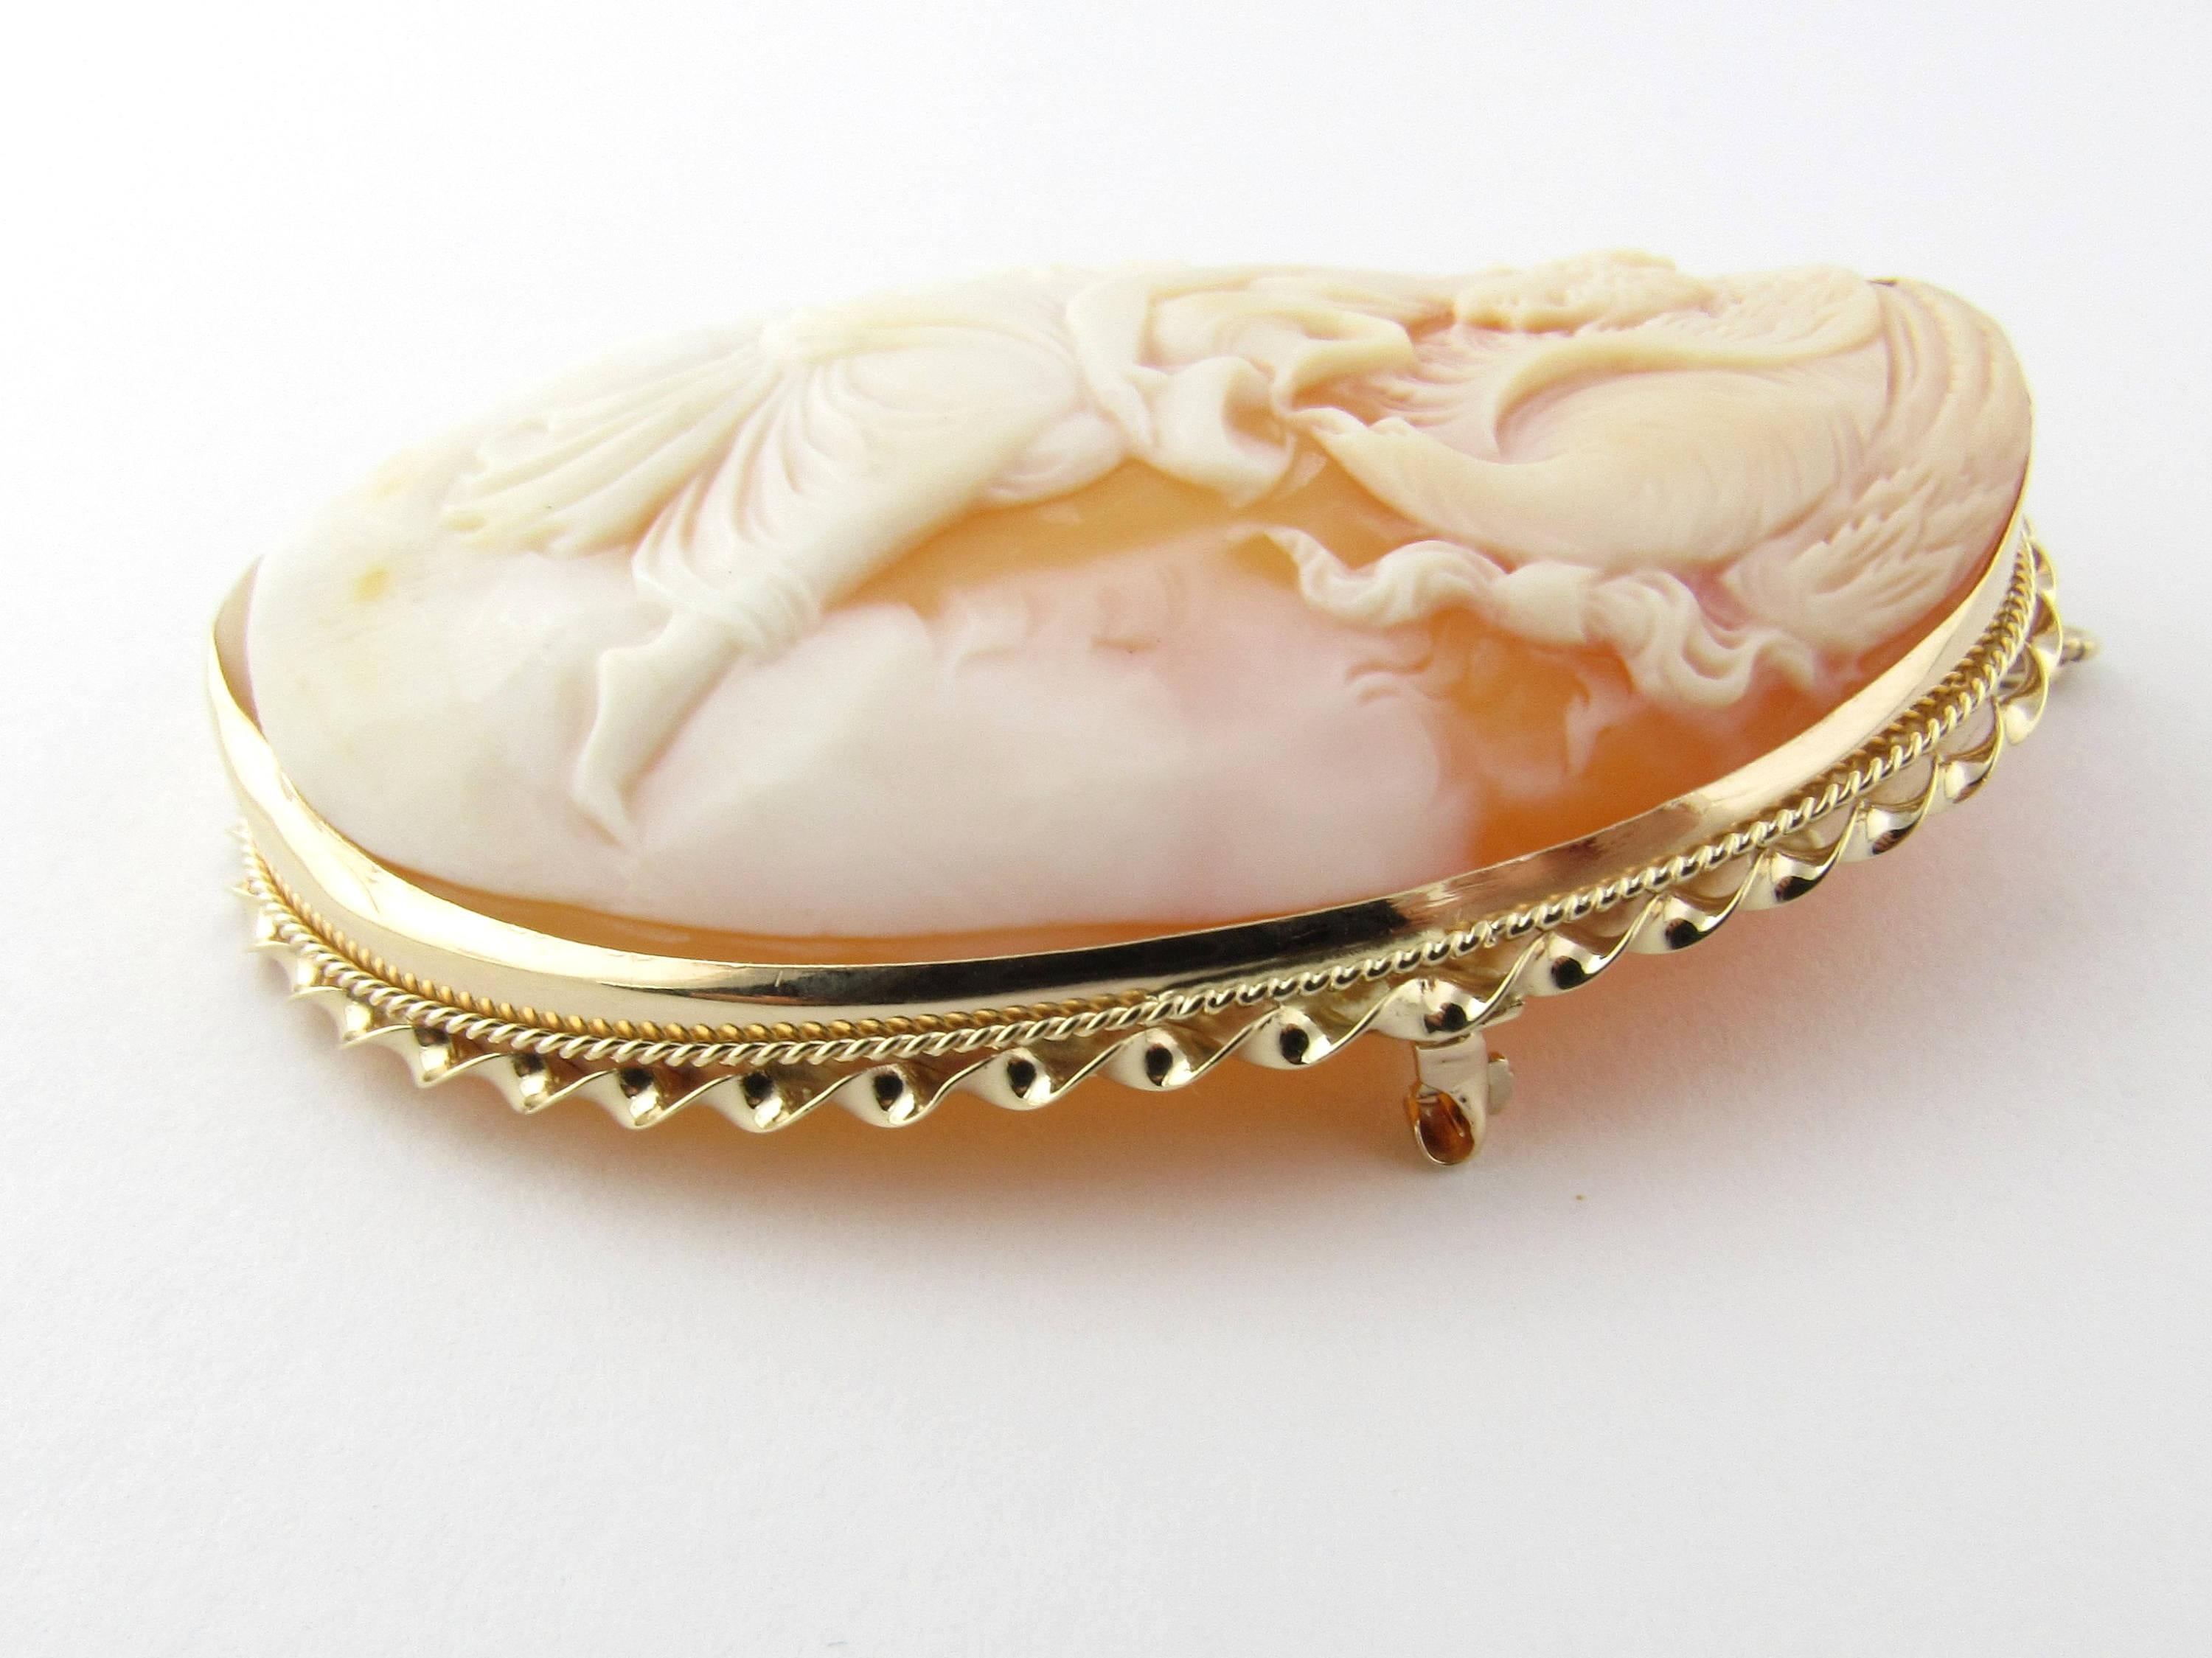  14 Karat Yellow Gold Cameo Pendant/Brooch - 
This stunning cameo features a lovely woman with the mythical phoenix drinking out of the pitcher she is holding. Beautifully detailed and framed in 14K yellow gold. Can be worn as a brooch or a pendant.